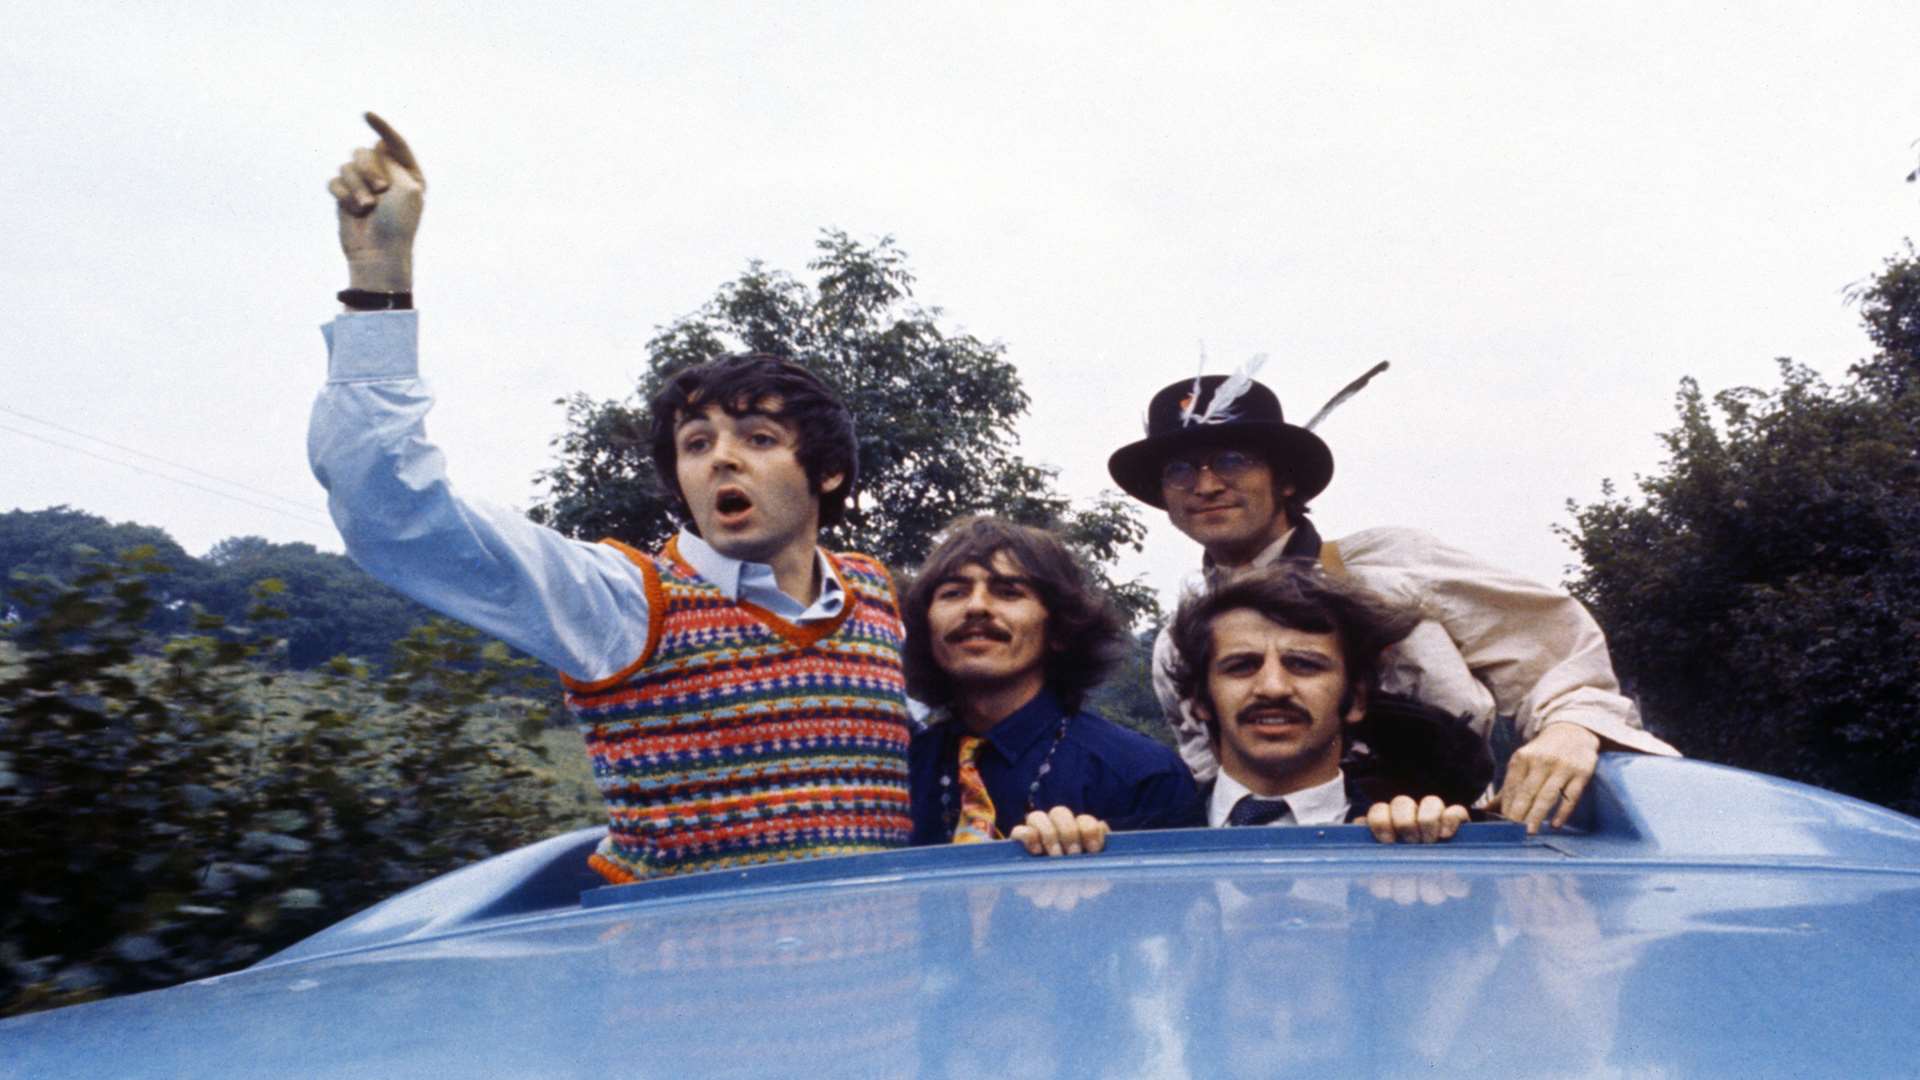 Some of The Beatles film Magical Mystery Tour was shot in the West Malling area